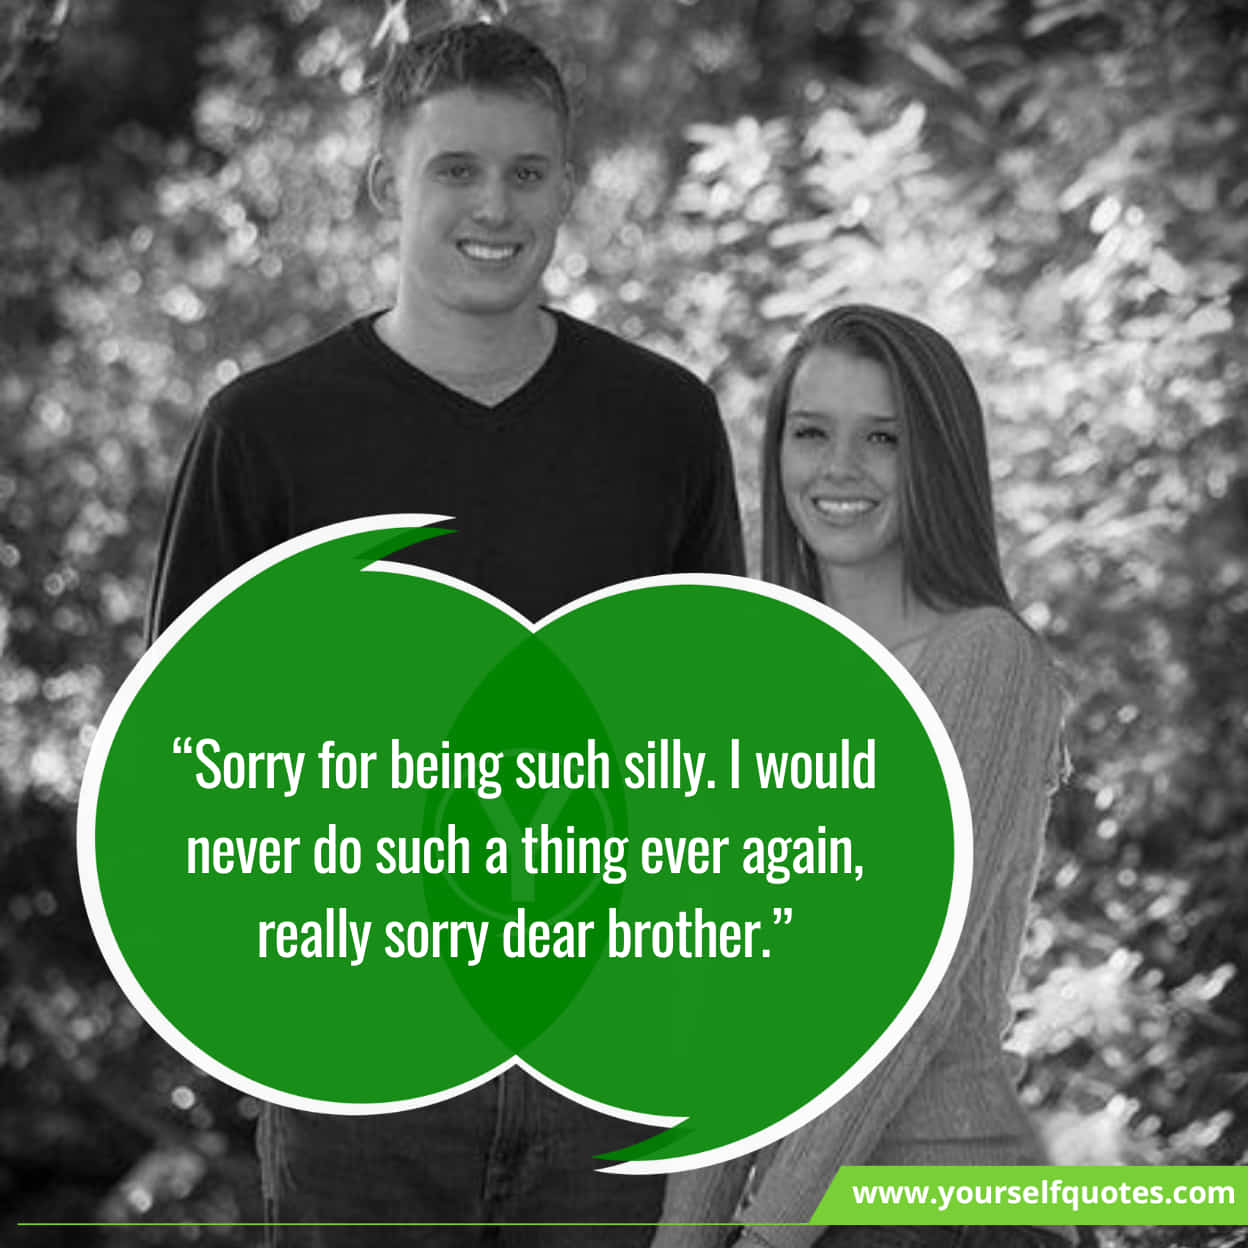 Emotional Sorry Messages for Brother